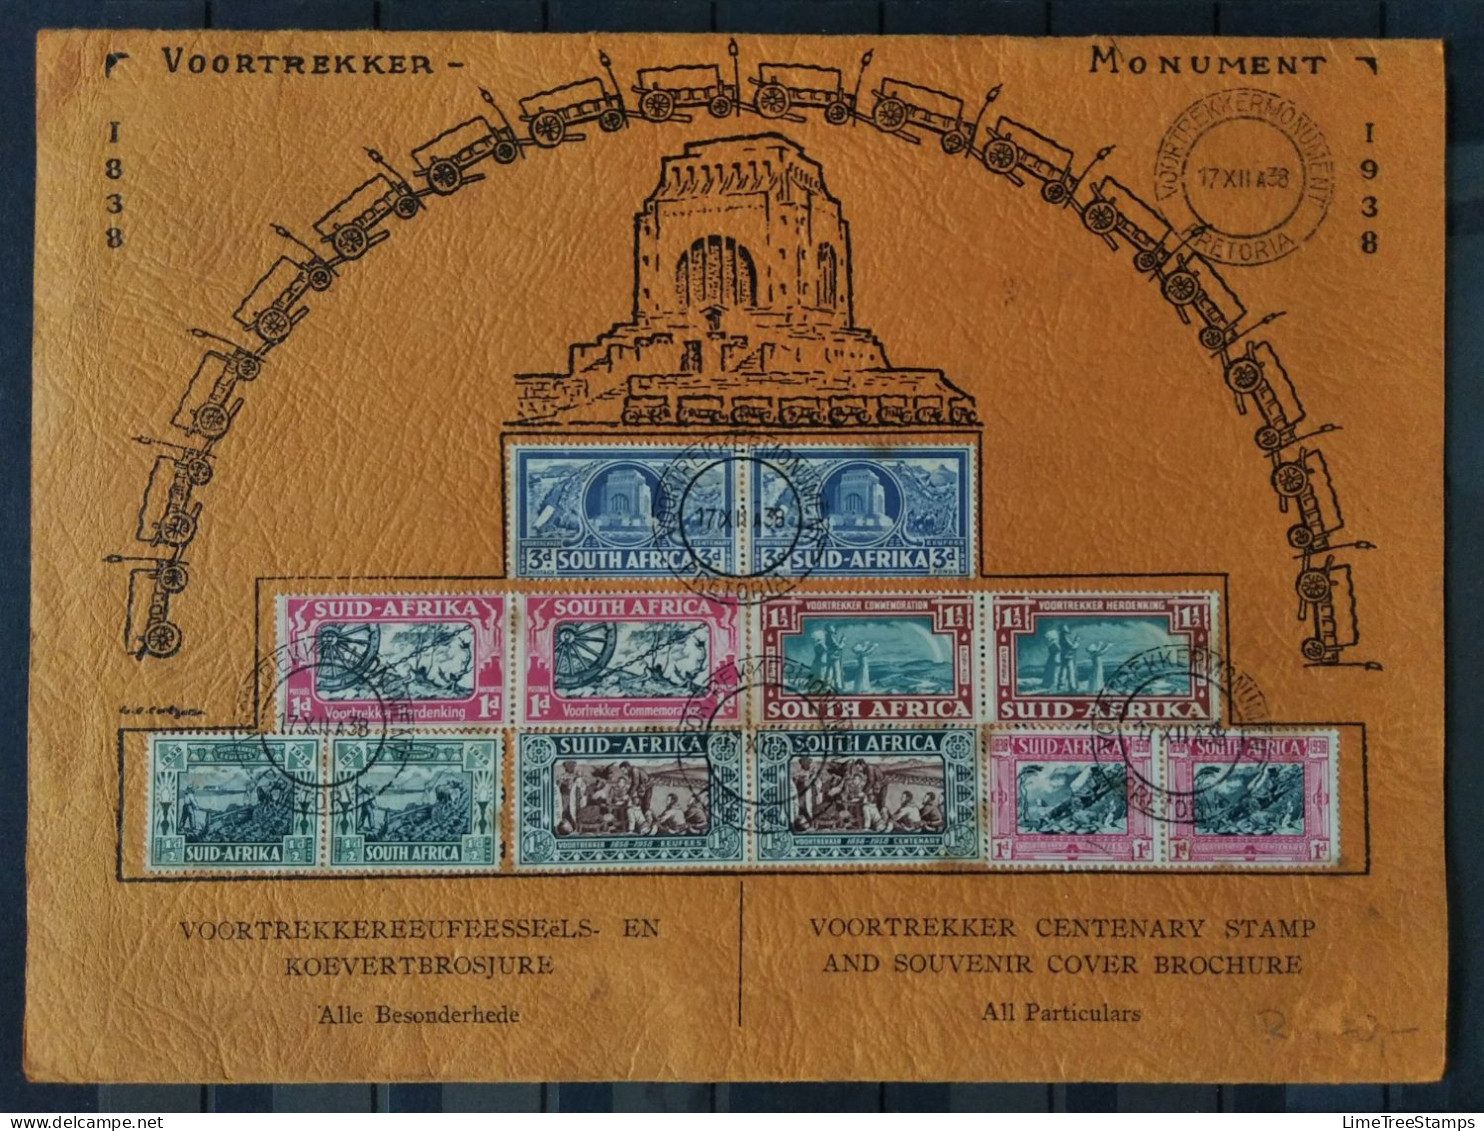 SOUTH AFRICA Original 1938 Voortrekker Centenary Stamp And Souvenir Cover Brochure With Program - Covers & Documents